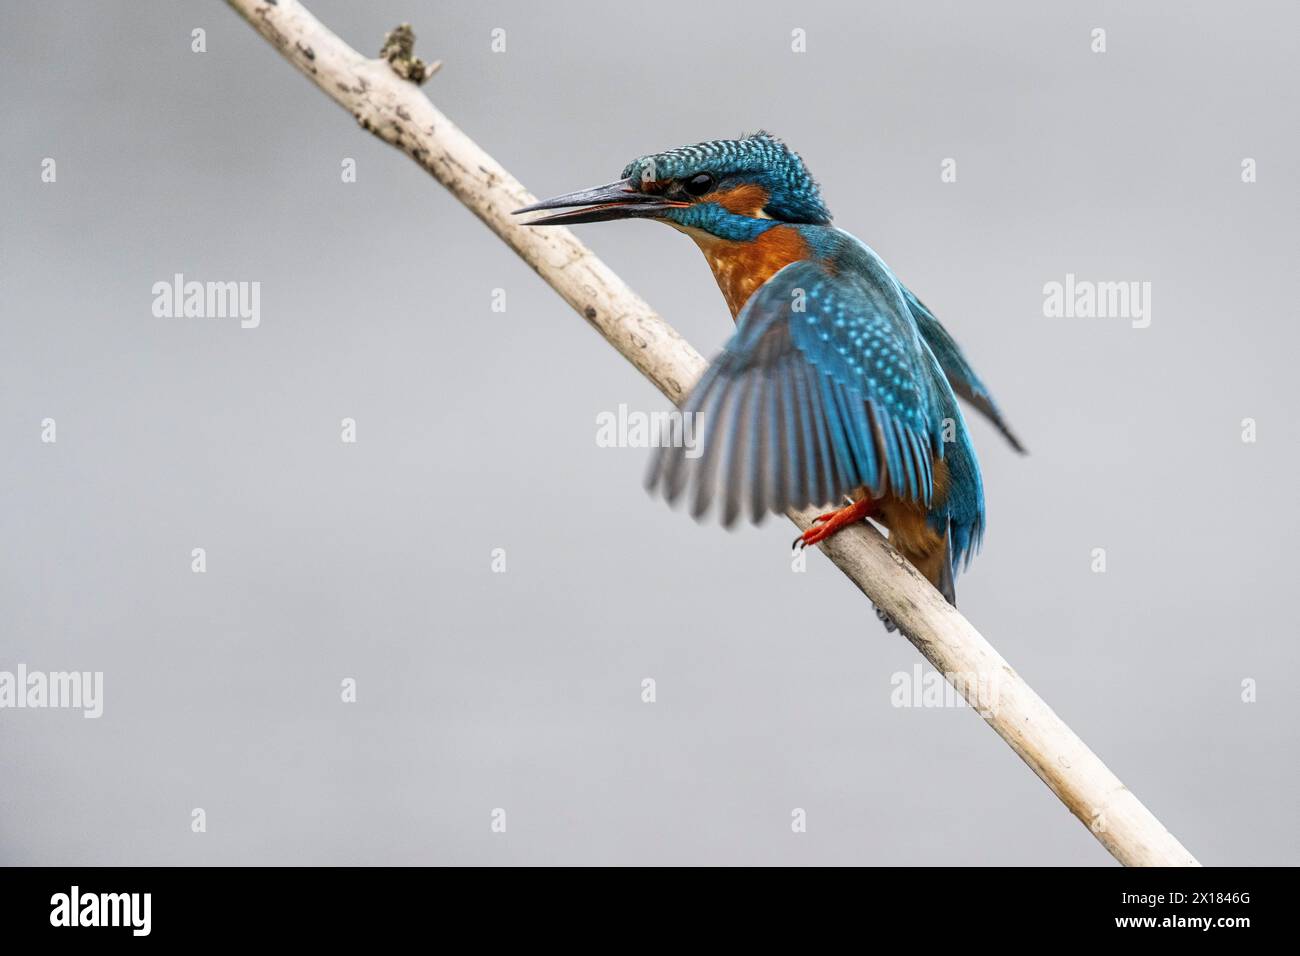 Common kingfisher (Alcedo atthis), Emsland, Basse-Saxe, Allemagne Banque D'Images